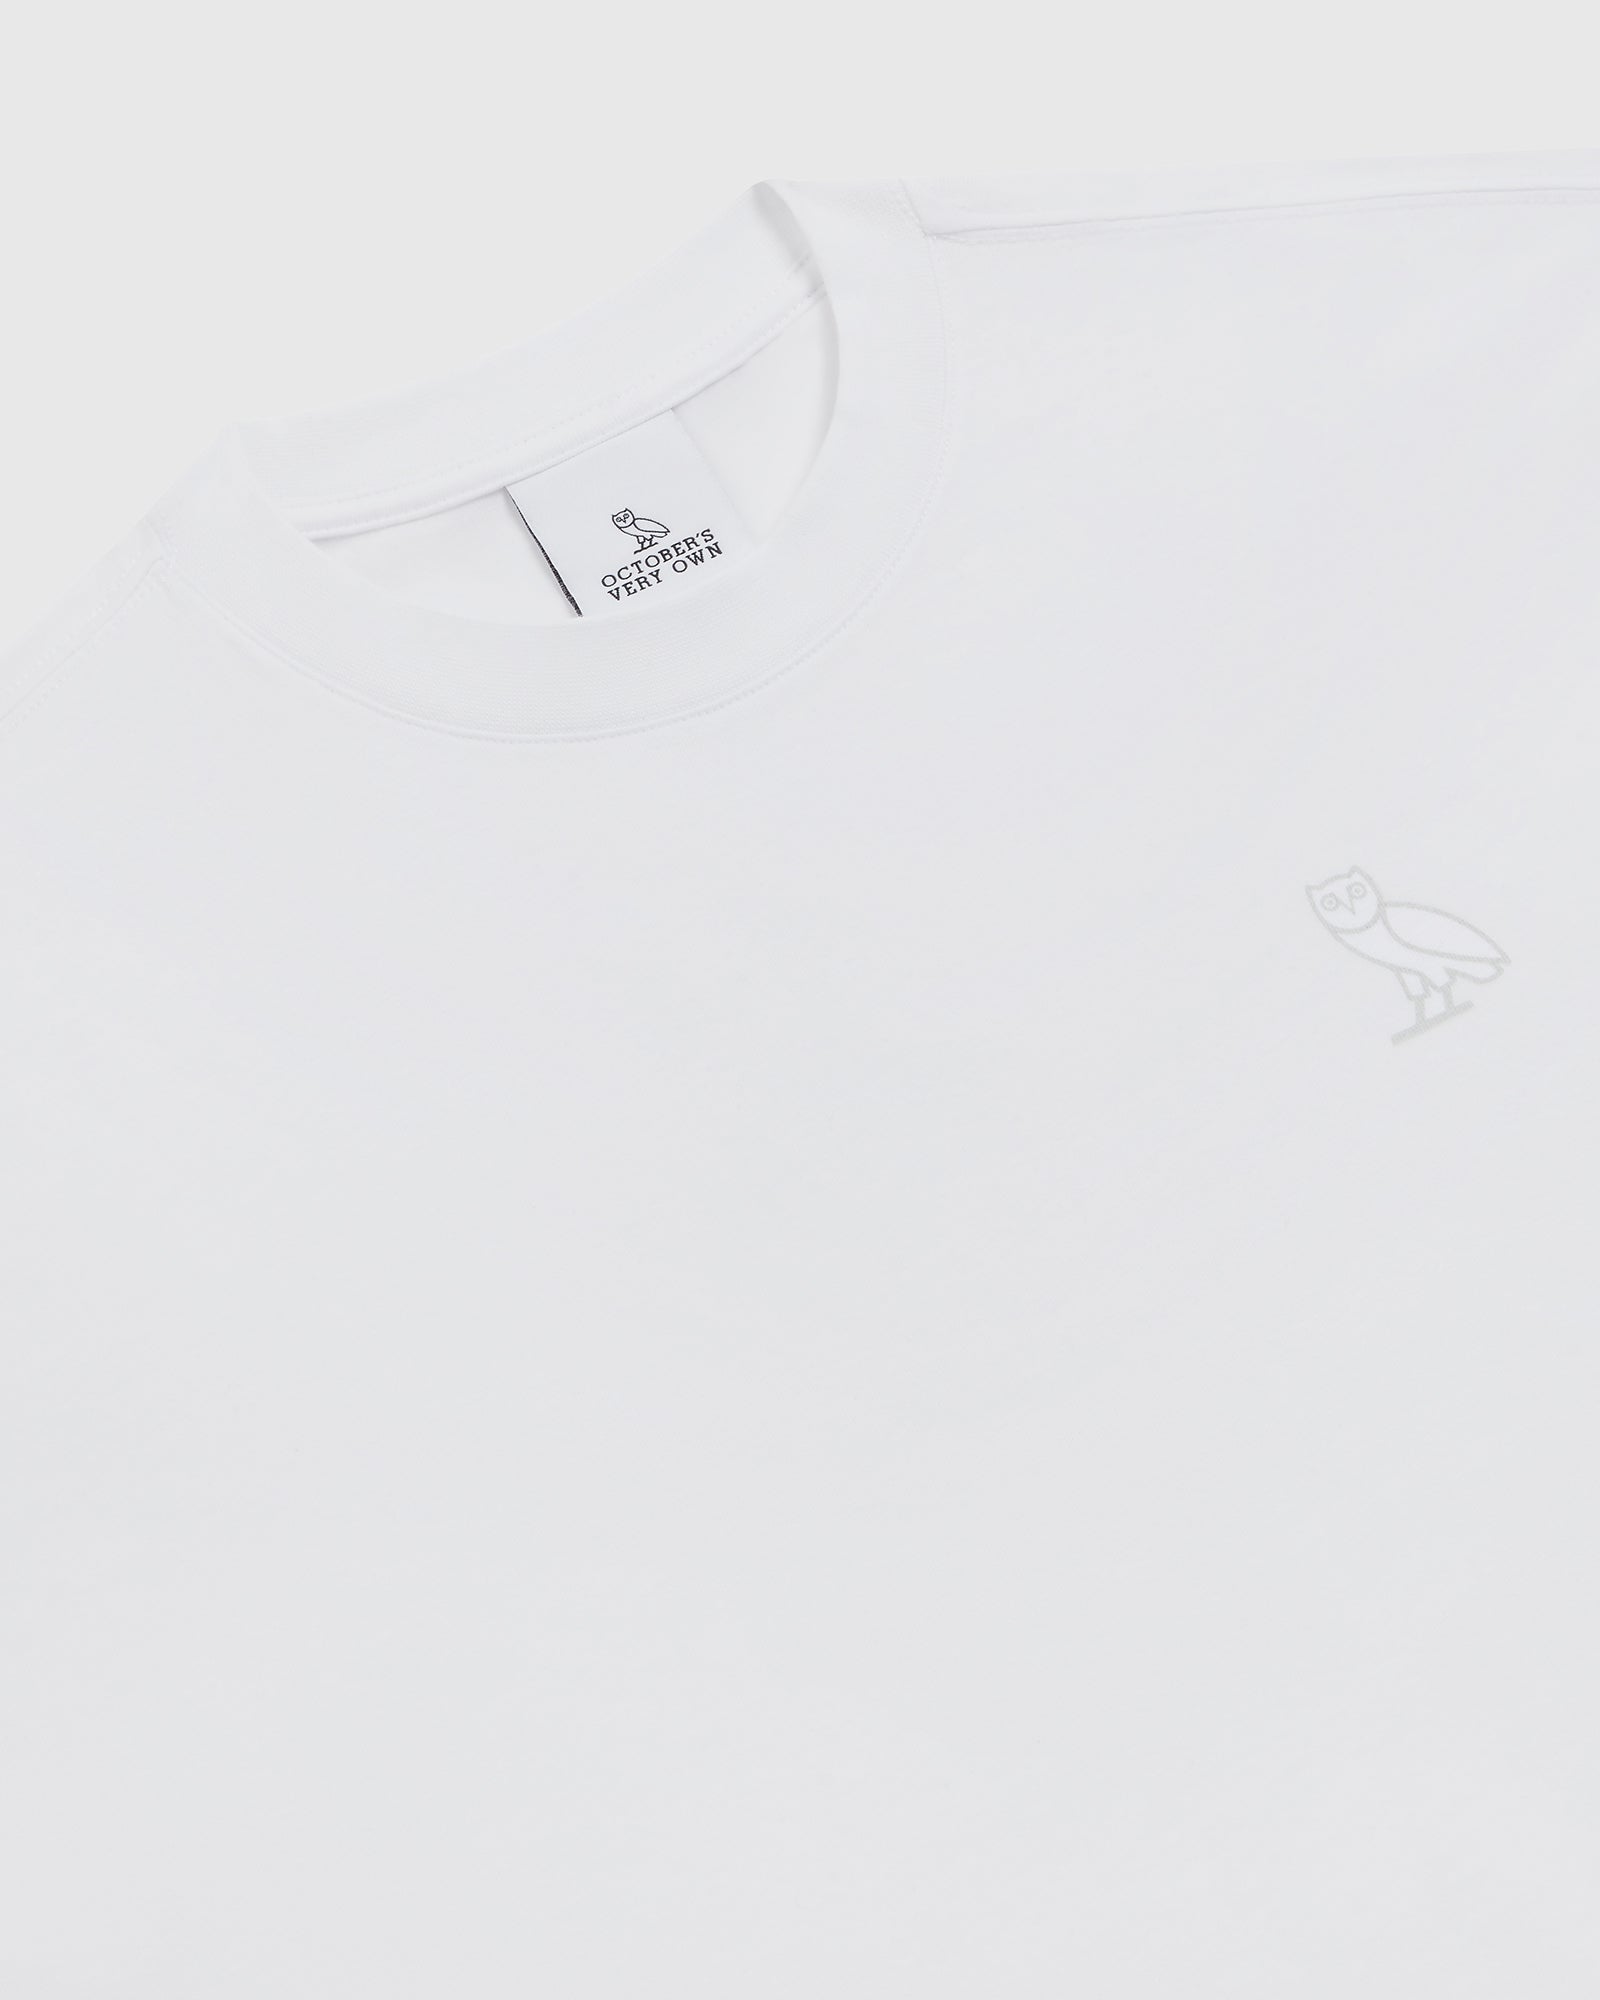 Relaxed Fit T-Shirt - White